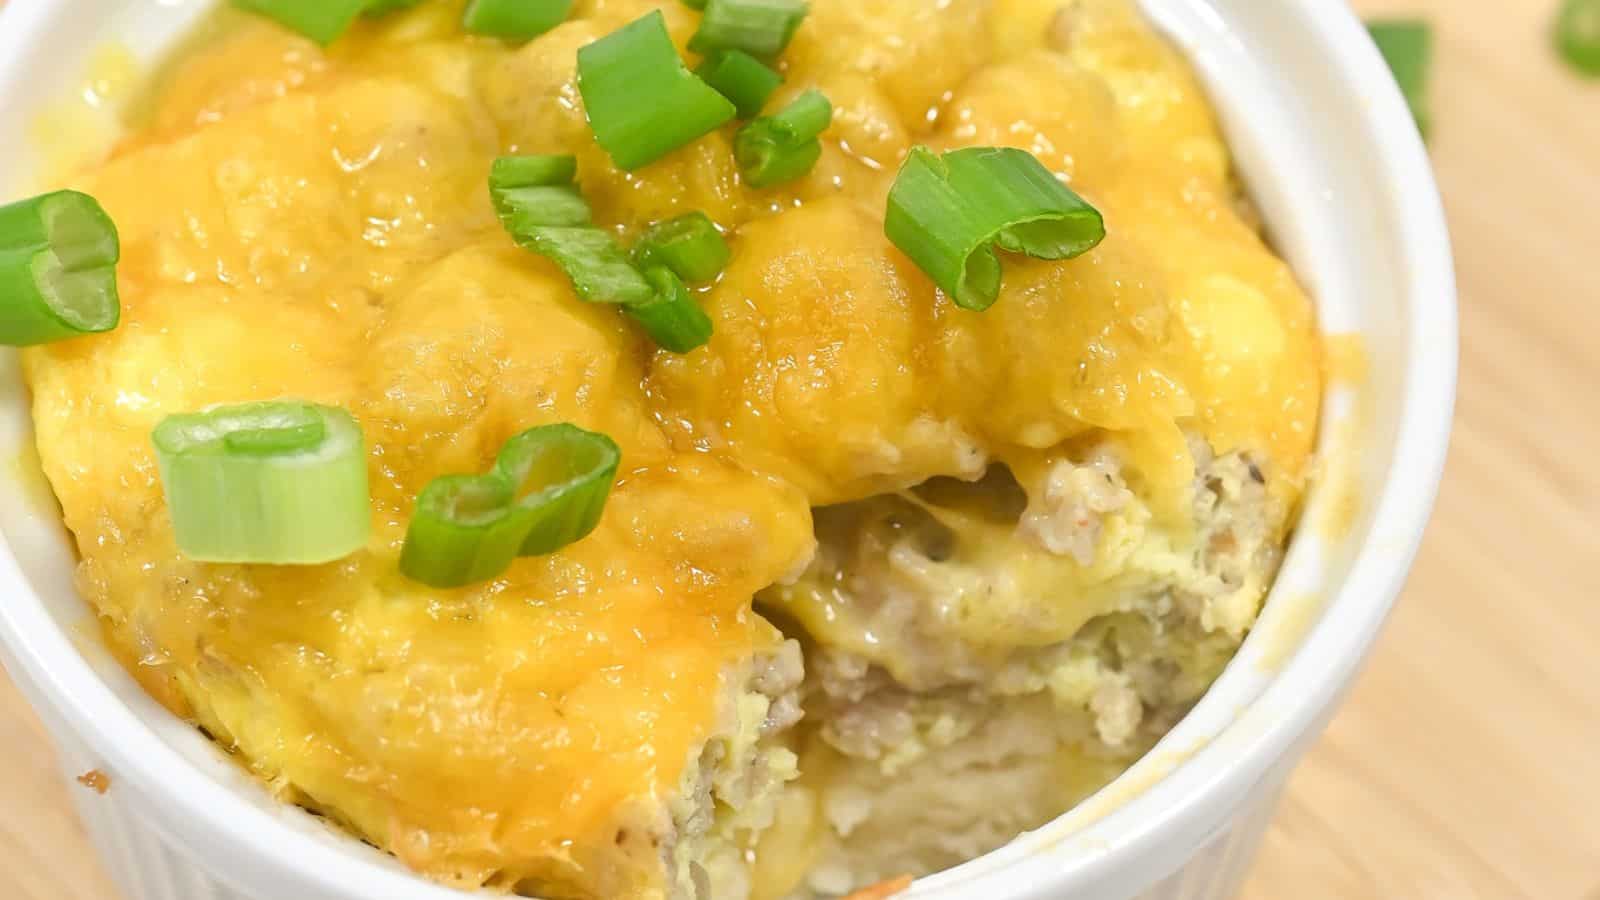 A white bowl filled with a cheesy, layered casserole topped with melted cheddar cheese and chopped green onions.